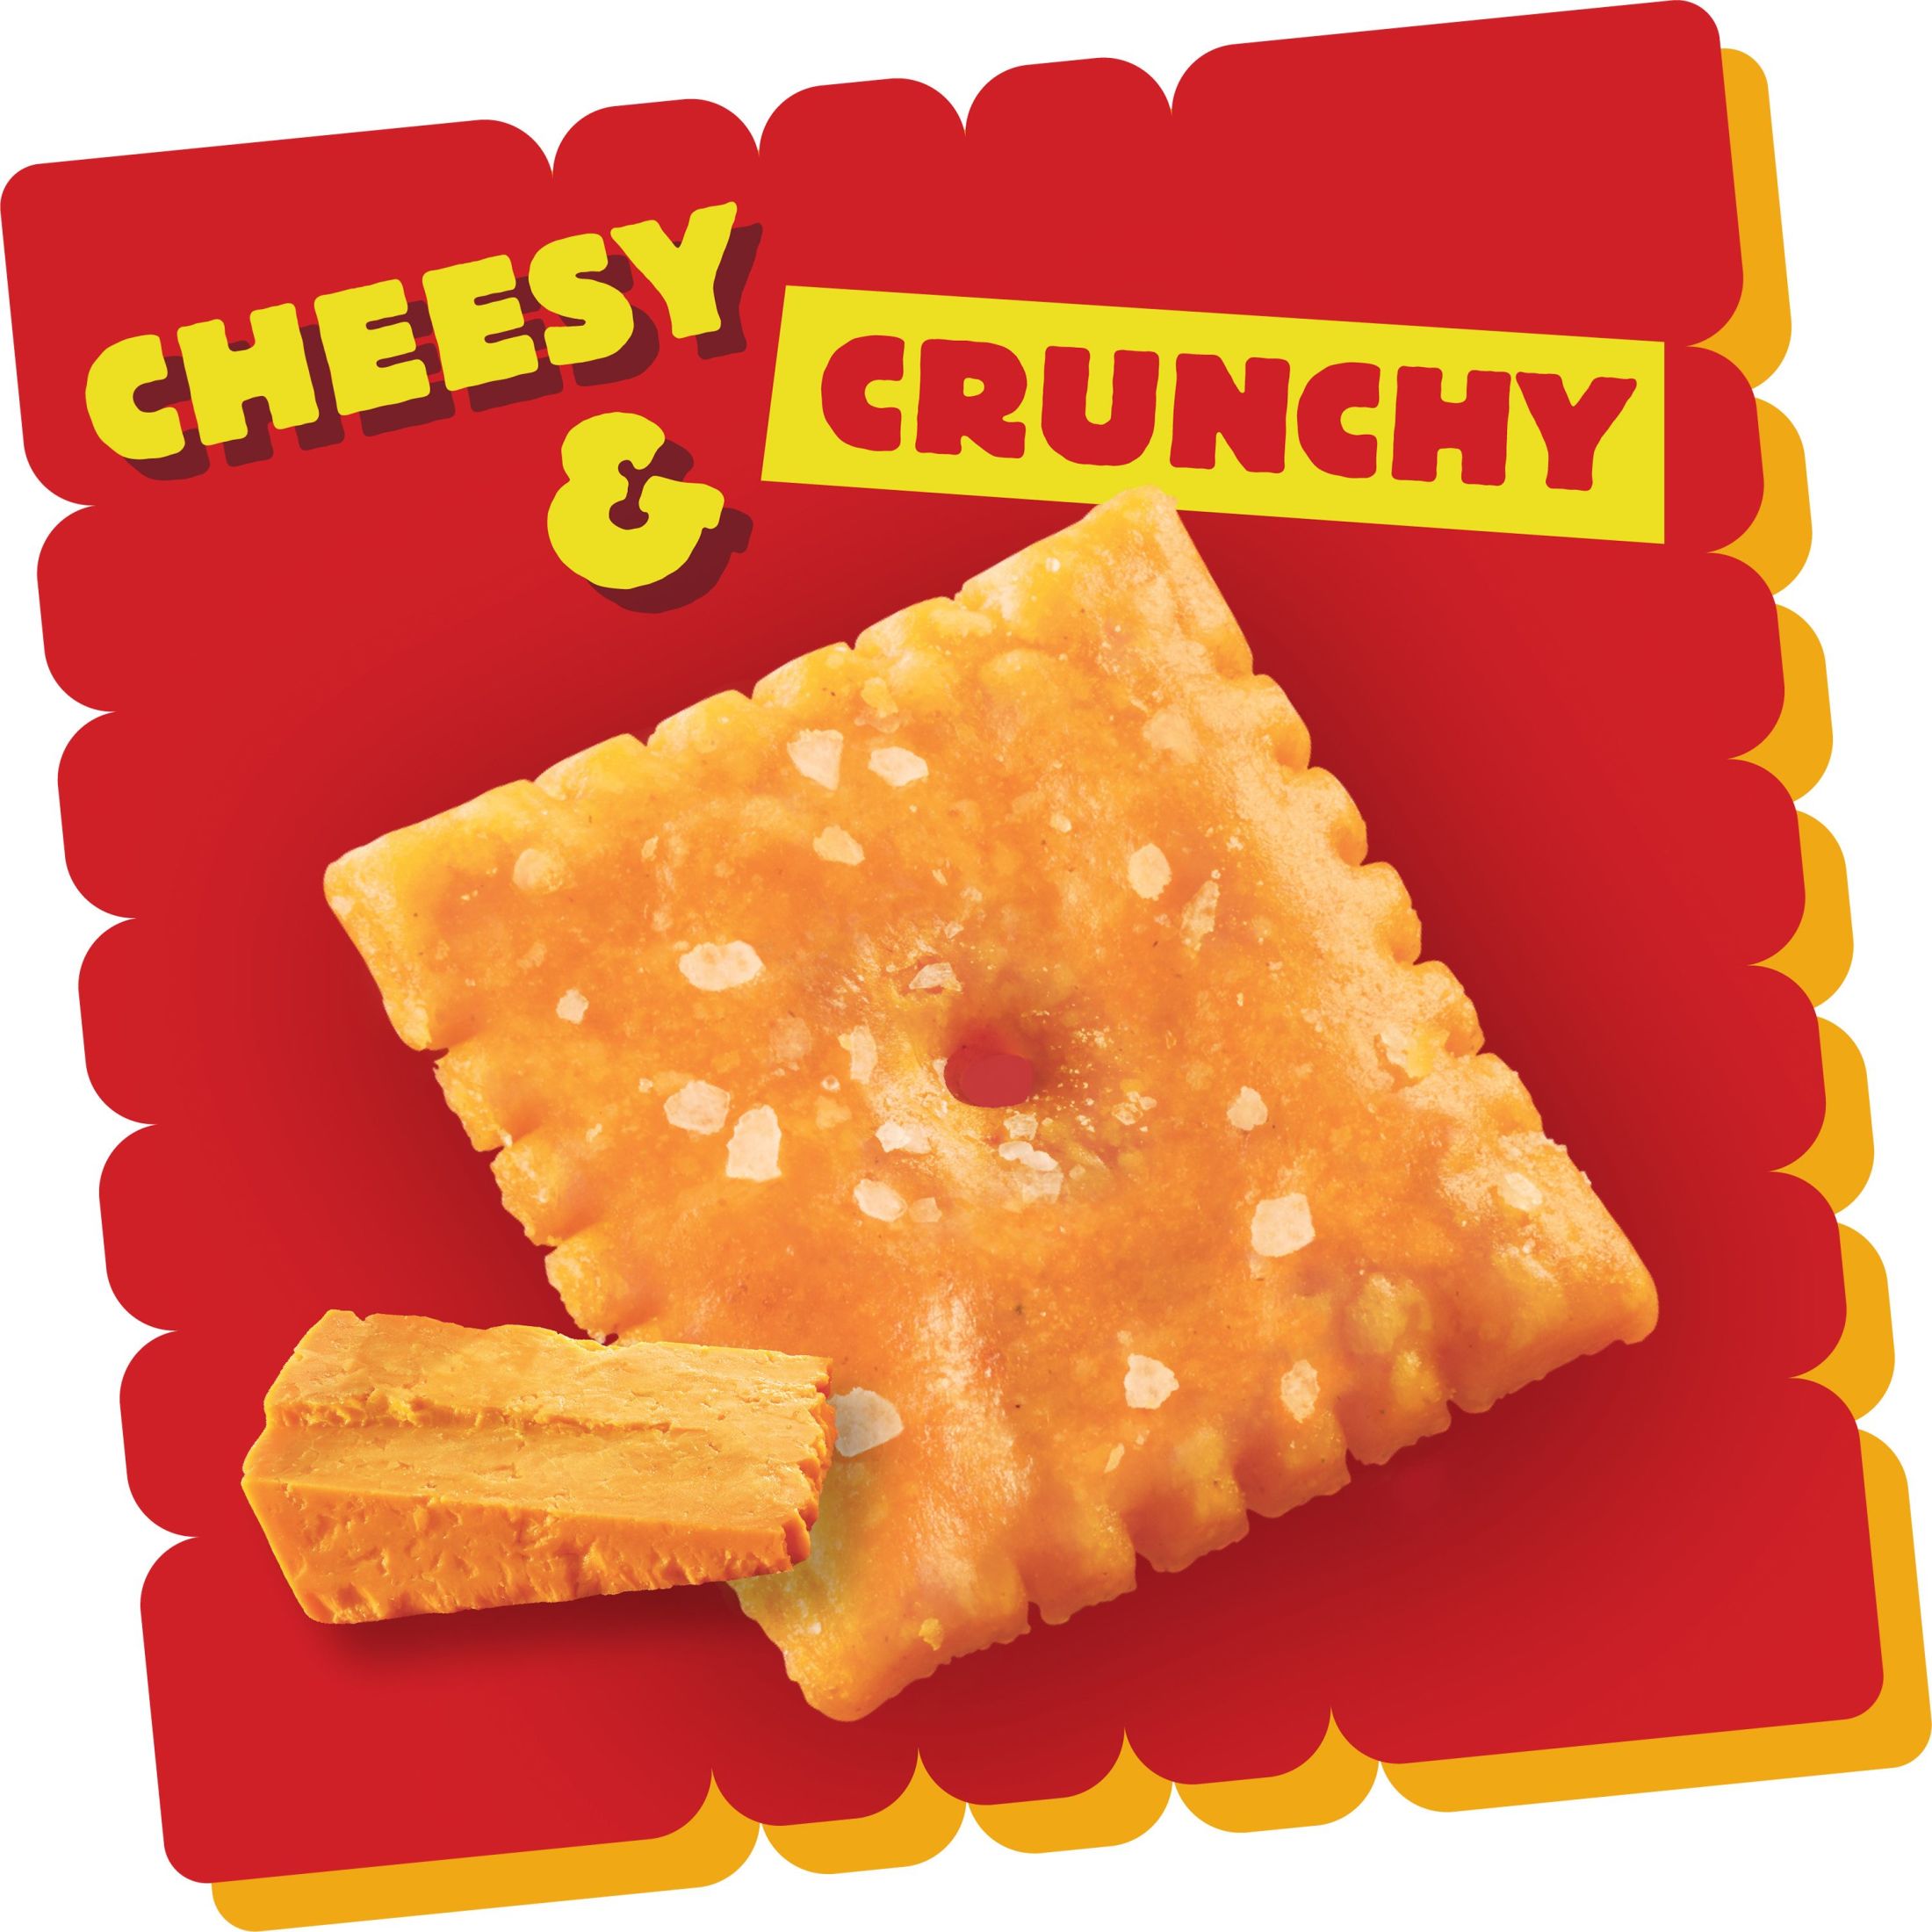 Cheez-It Original Cheese Crackers, Baked Snack Crackers, 21 oz - image 3 of 12